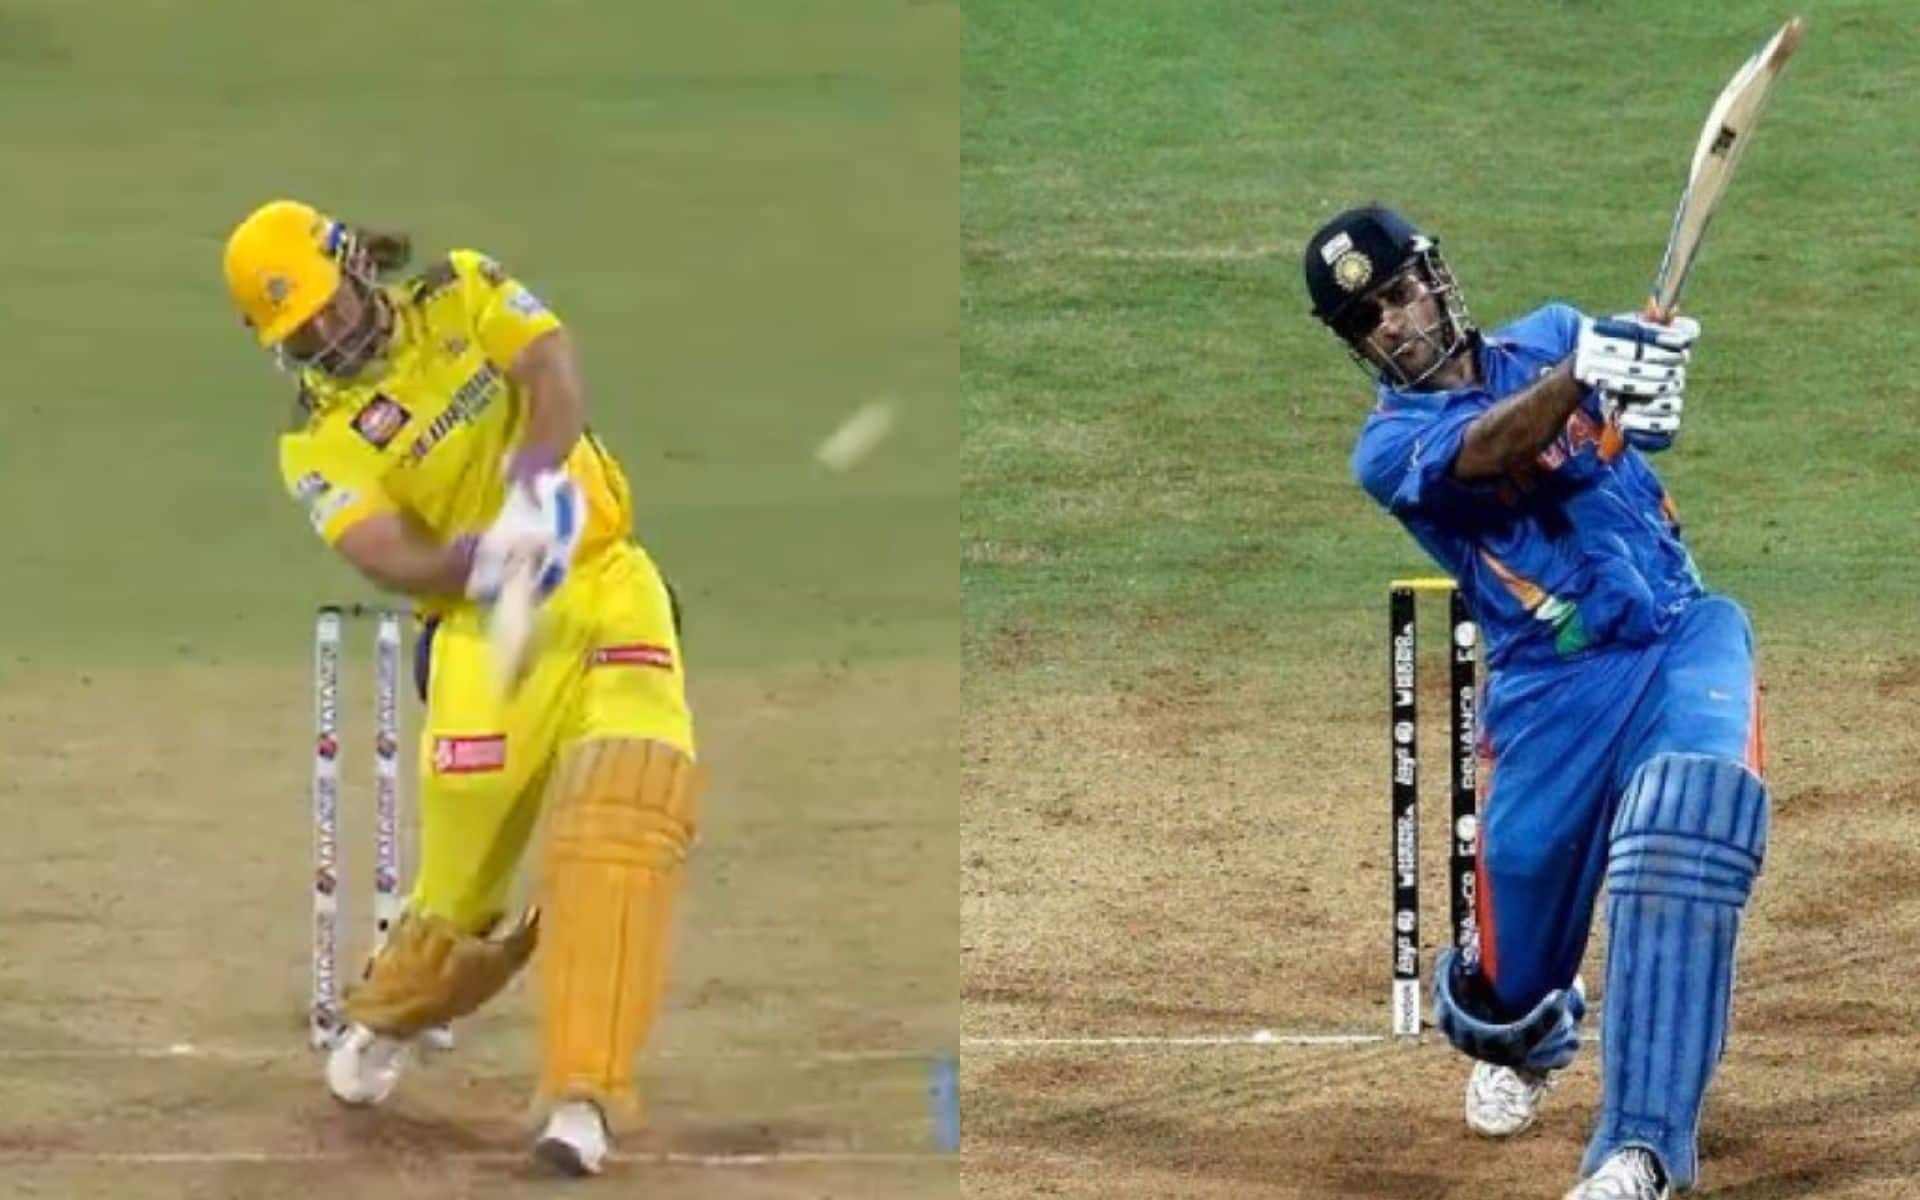 MS Dhoni recreates this beauty once again!
